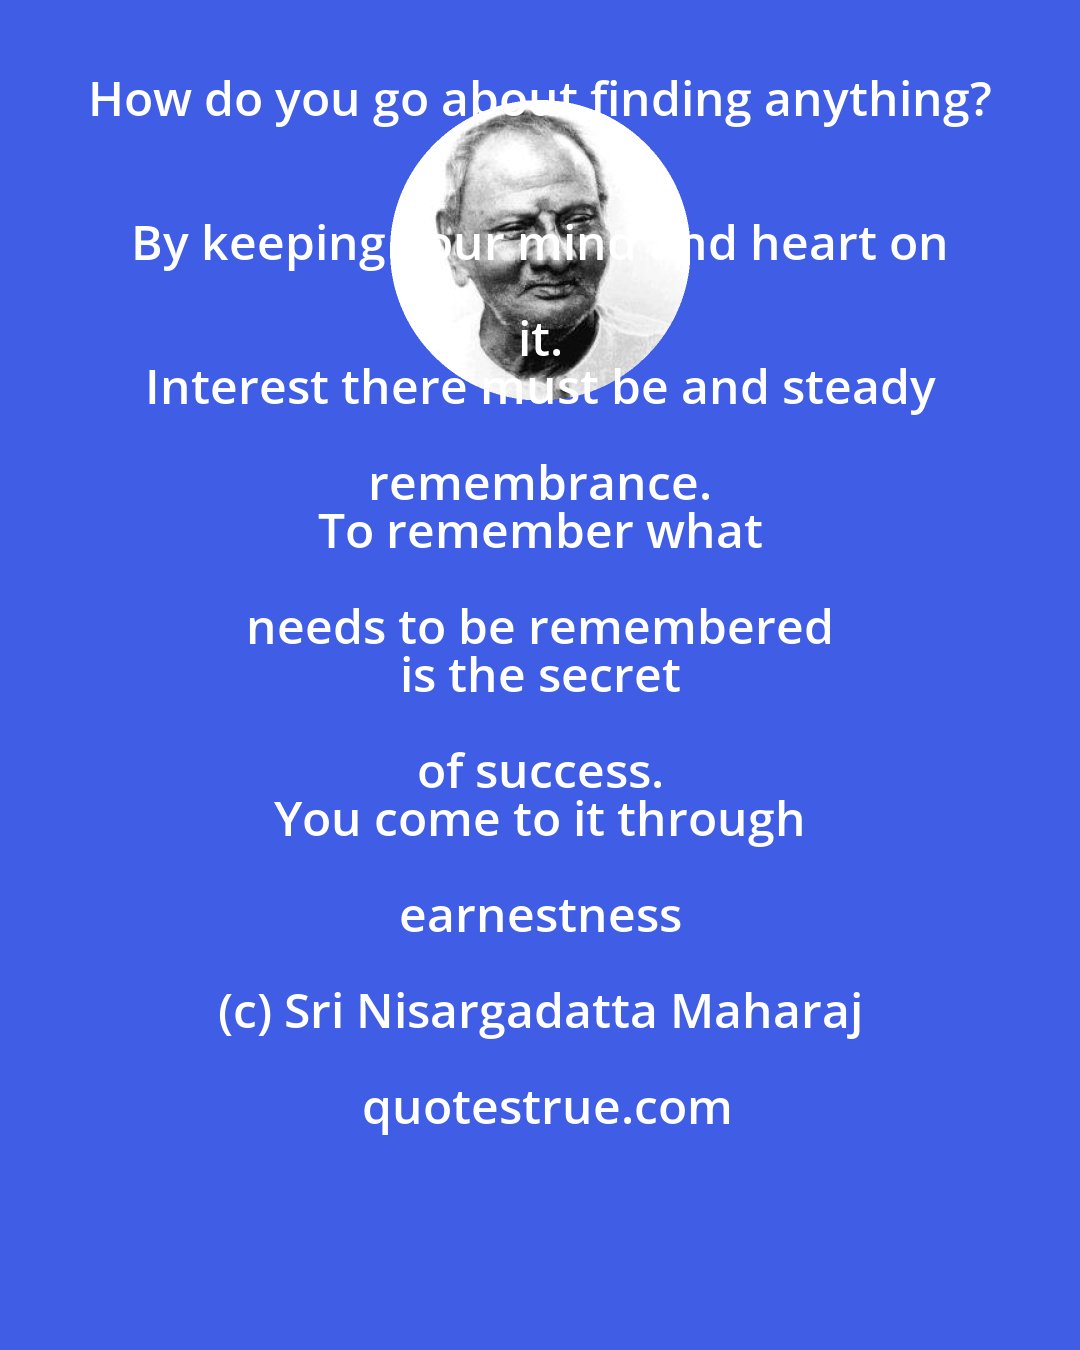 Sri Nisargadatta Maharaj: How do you go about finding anything? 
 By keeping your mind and heart on it. 
 Interest there must be and steady remembrance. 
 To remember what needs to be remembered 
 is the secret of success. 
 You come to it through earnestness